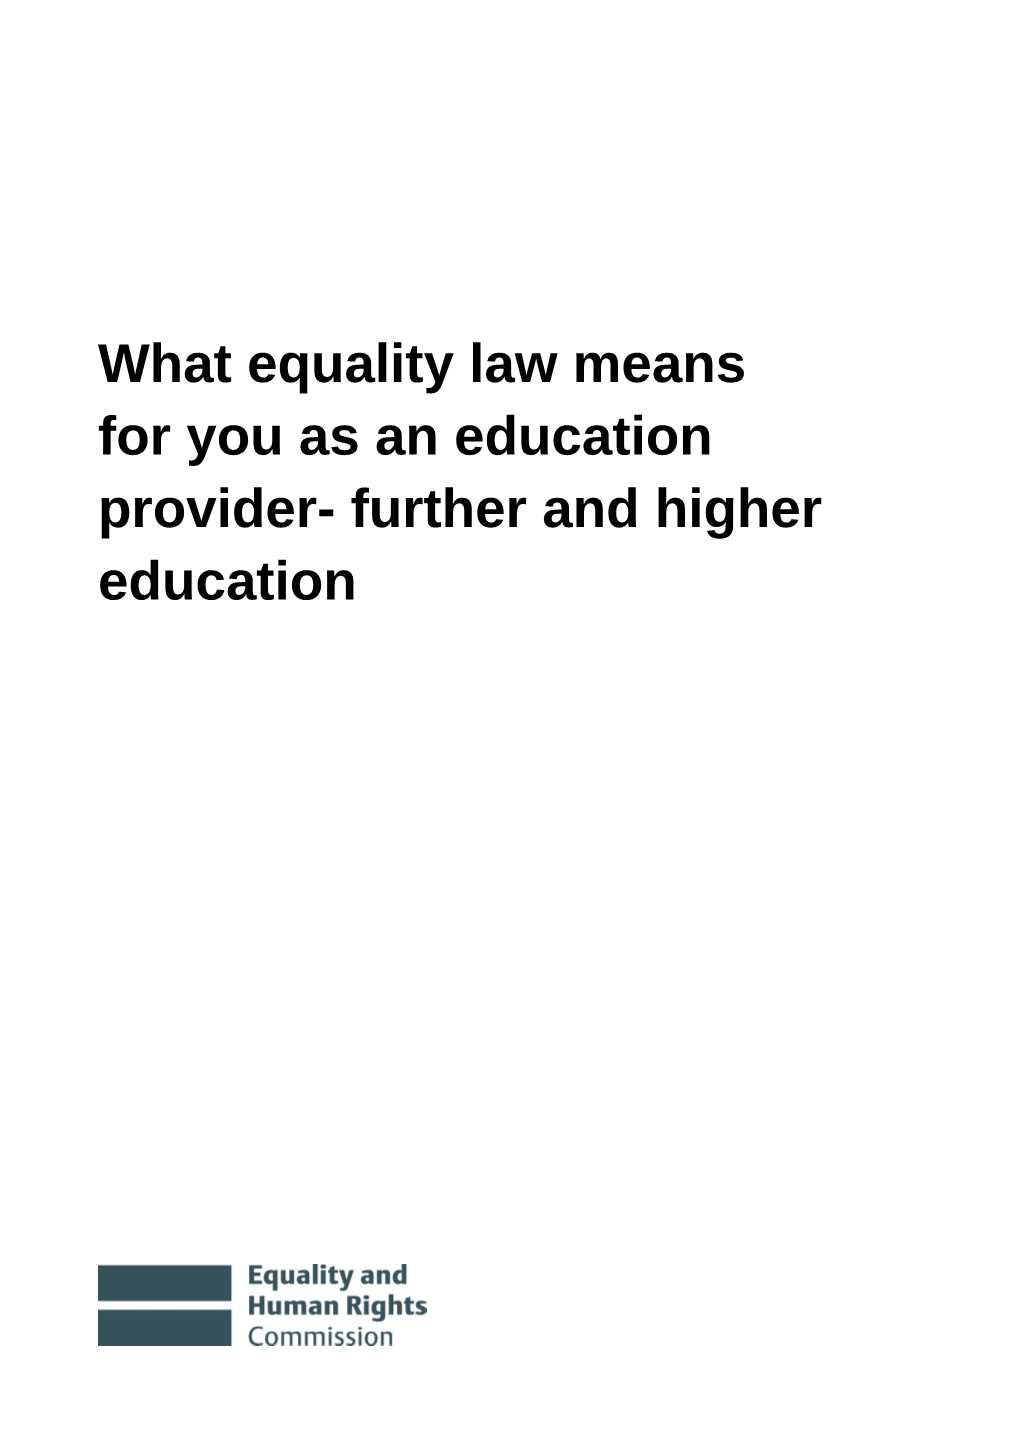 What Equality Law Means for You As an Education Provider- Further and Higher Education